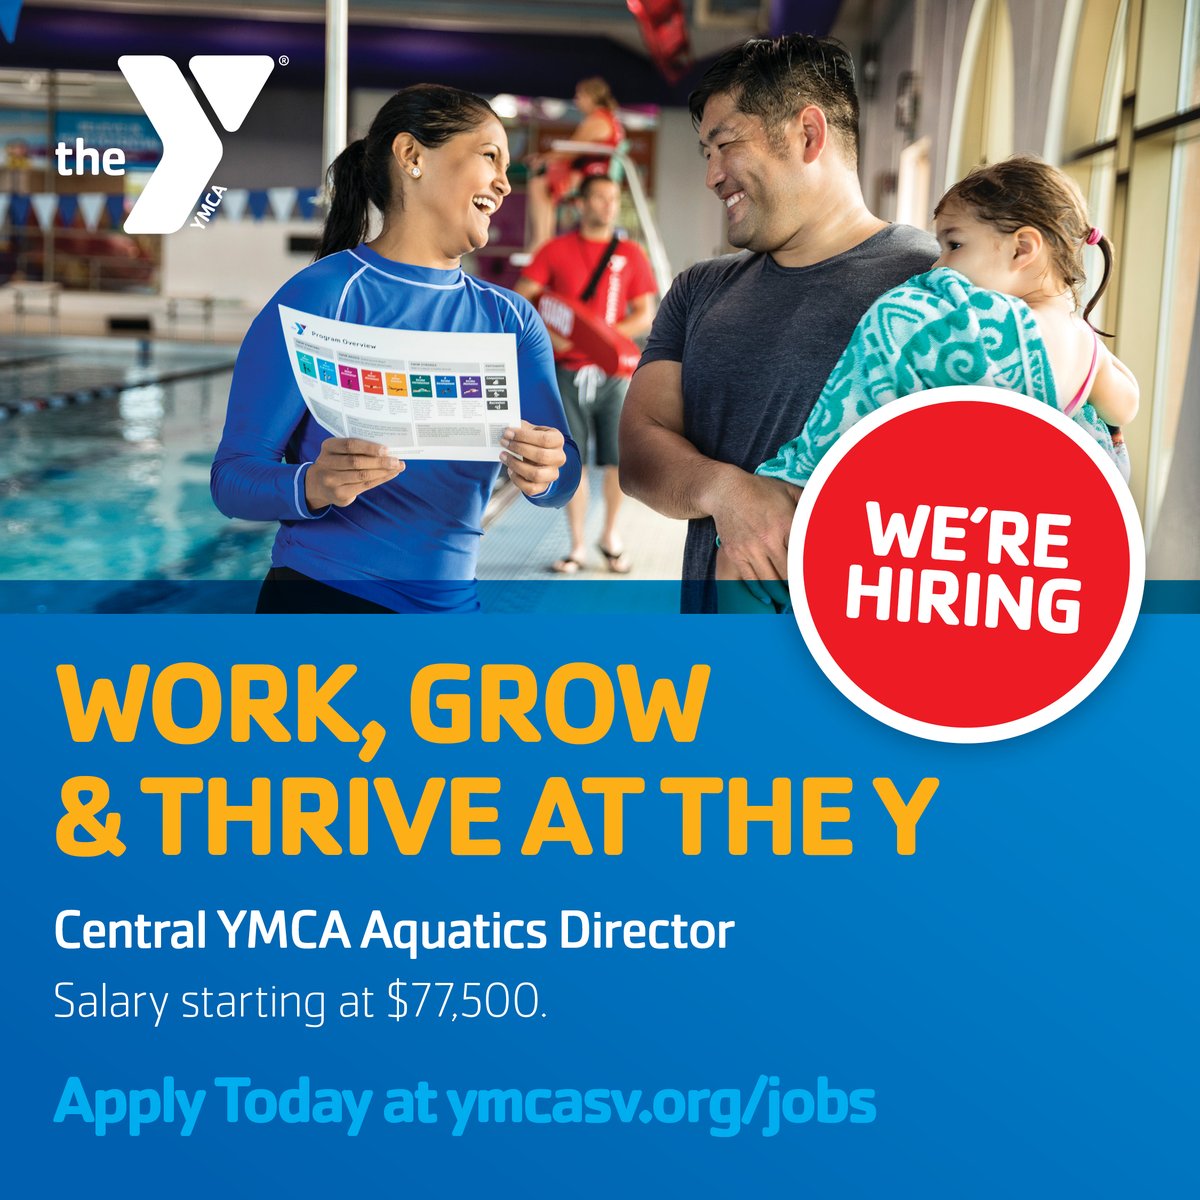 Our Central YMCA is searching for an Aquatics Director. Are you passionate about water safety, swim lessons and leading a great aquatics team? Apply today: ow.ly/KSoW50M9JFn